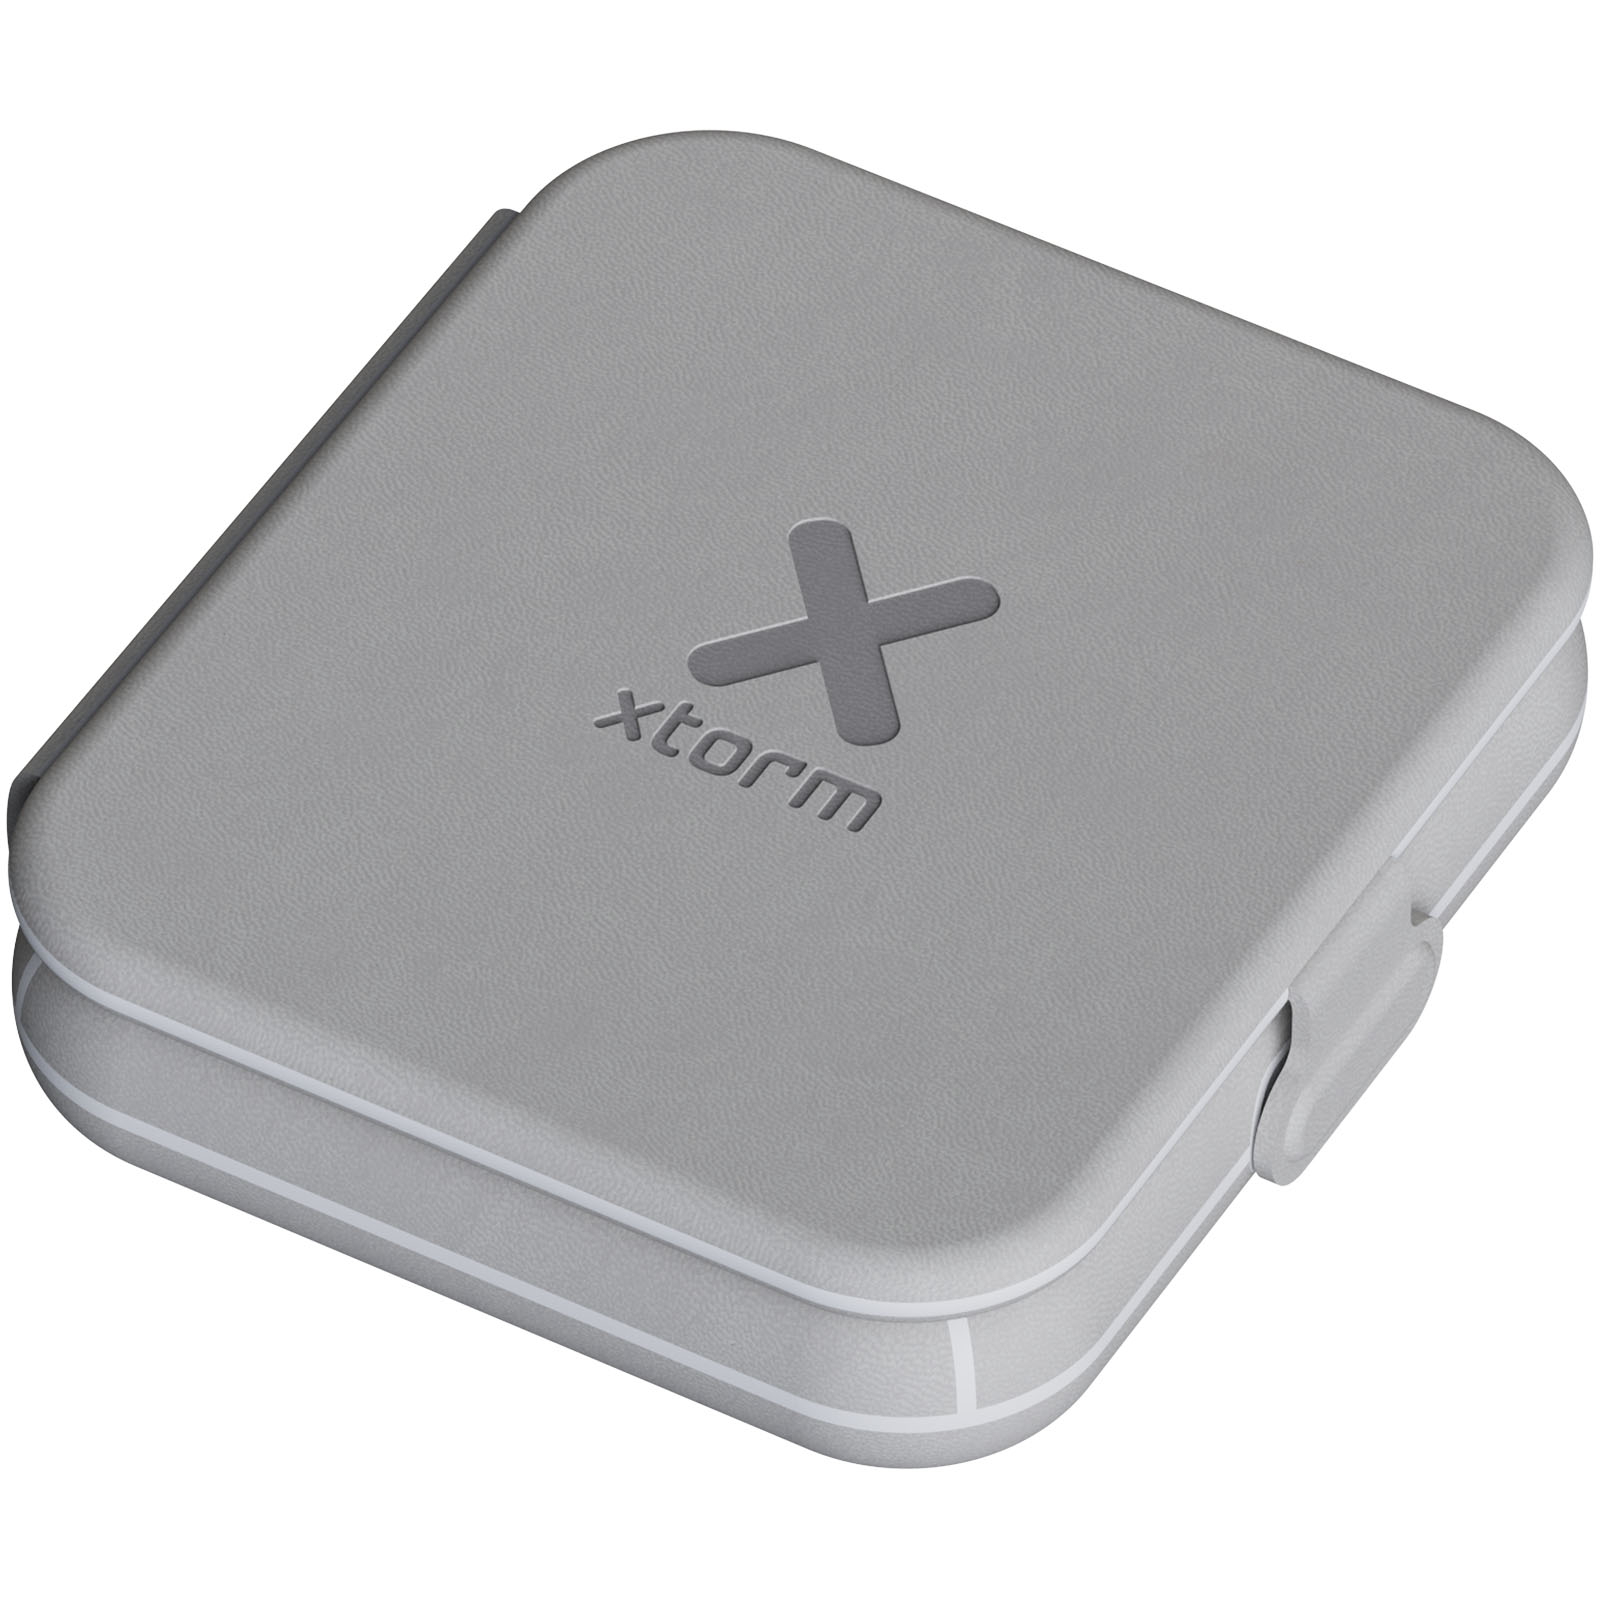 Technology - Xtorm XWF21 15W foldable 2-in-1 wireless travel charger